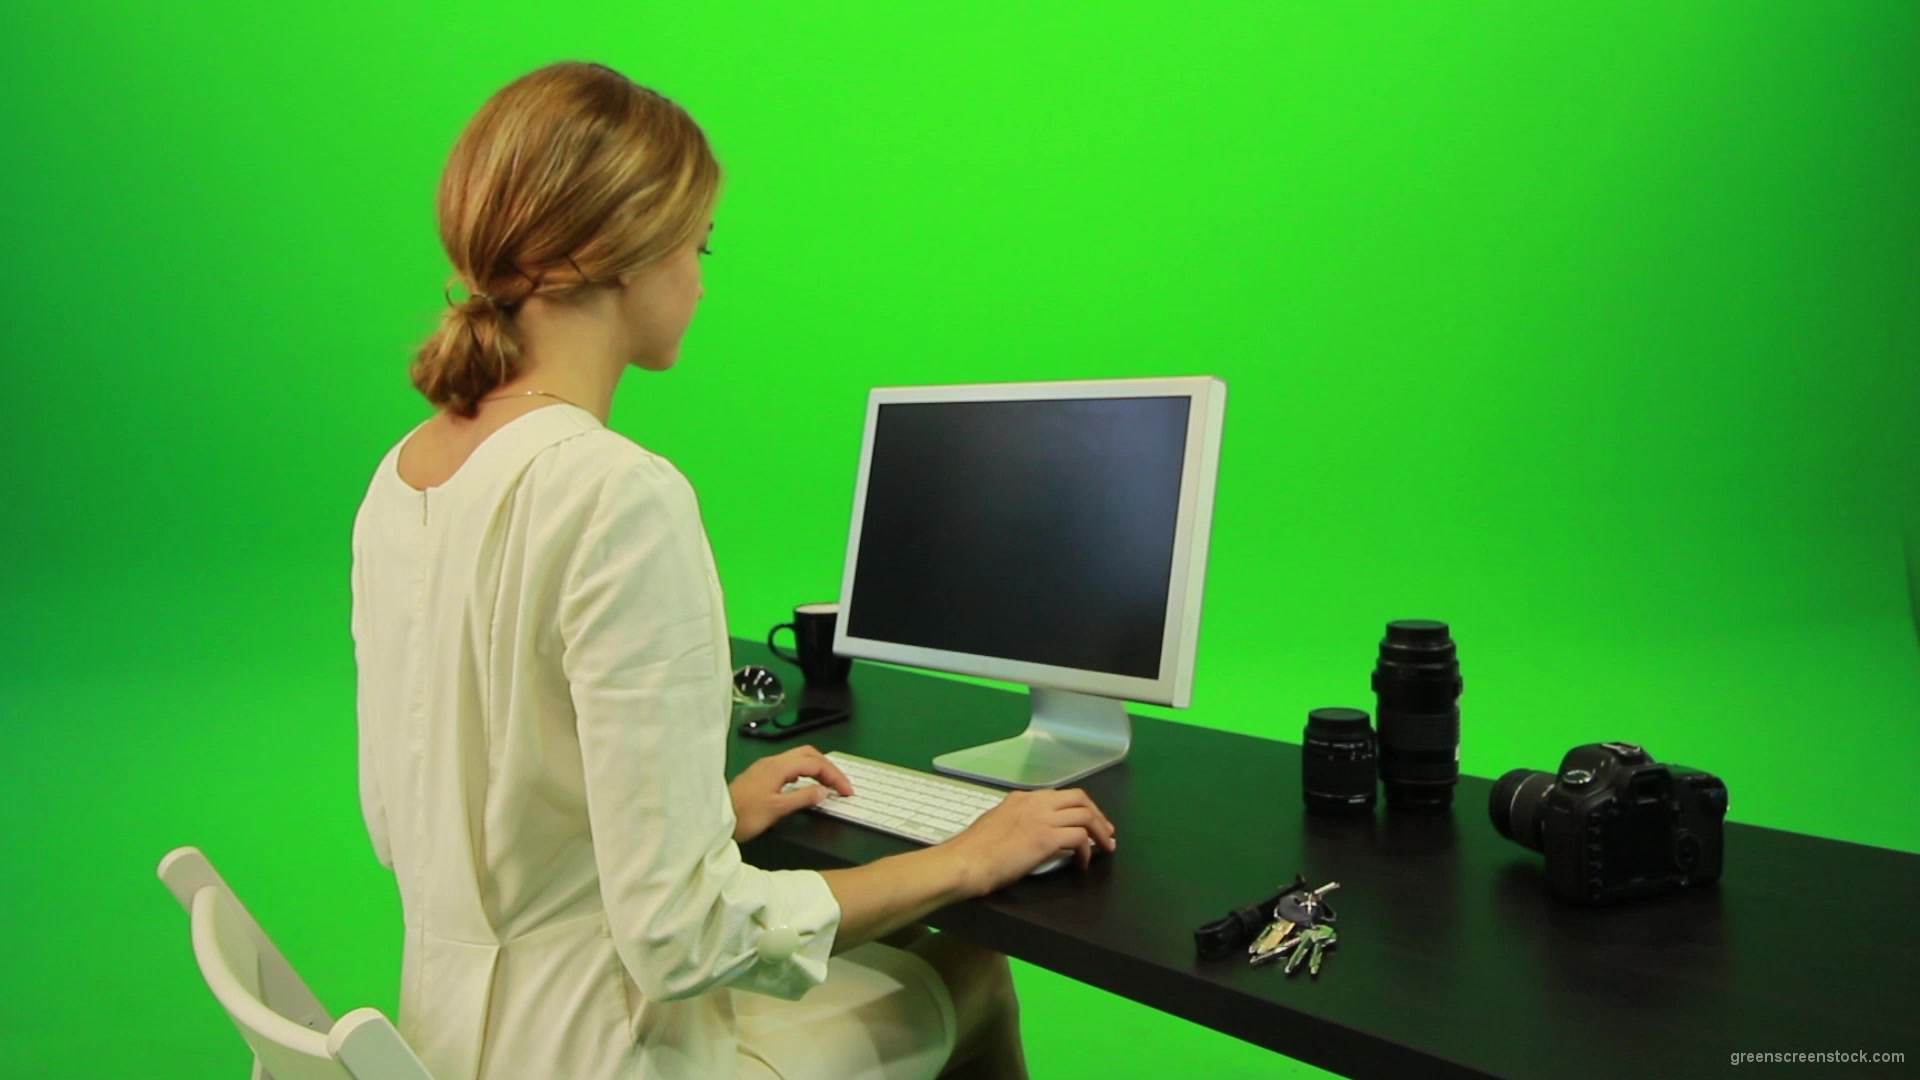 Woman-Sits-Down-and-Works-on-the-Computer-Green-Screen-Footage_005 Green Screen Stock